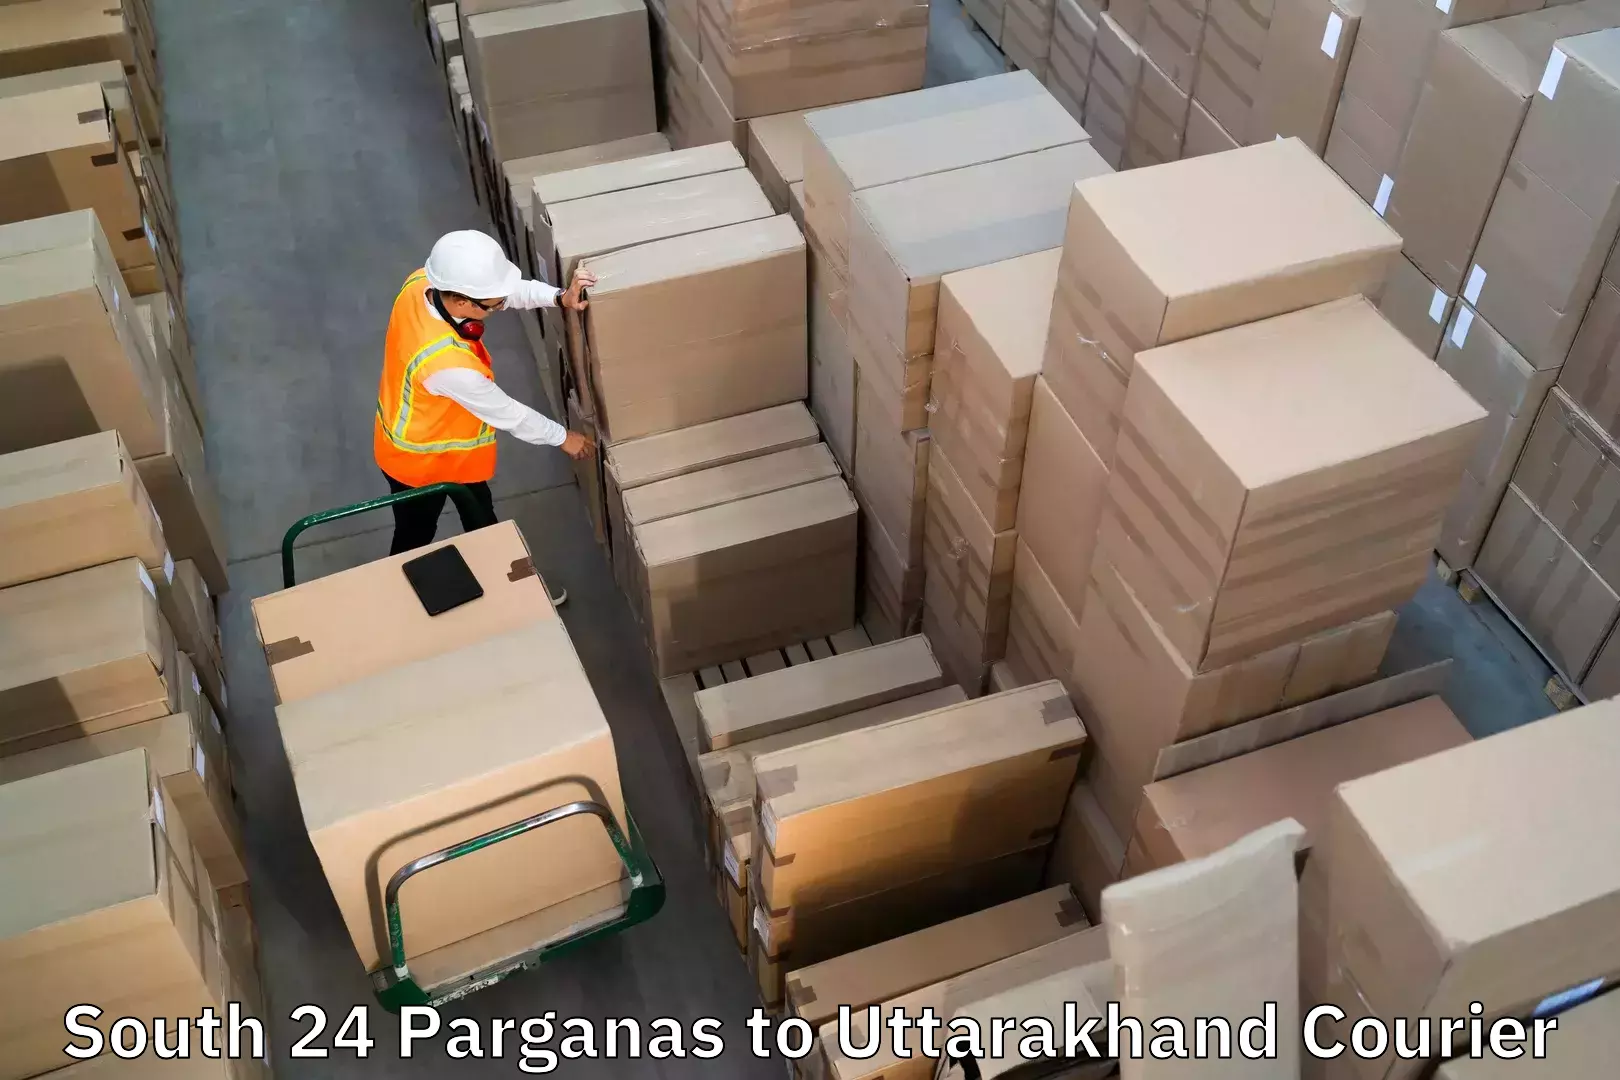 Luggage delivery app South 24 Parganas to Uttarakhand